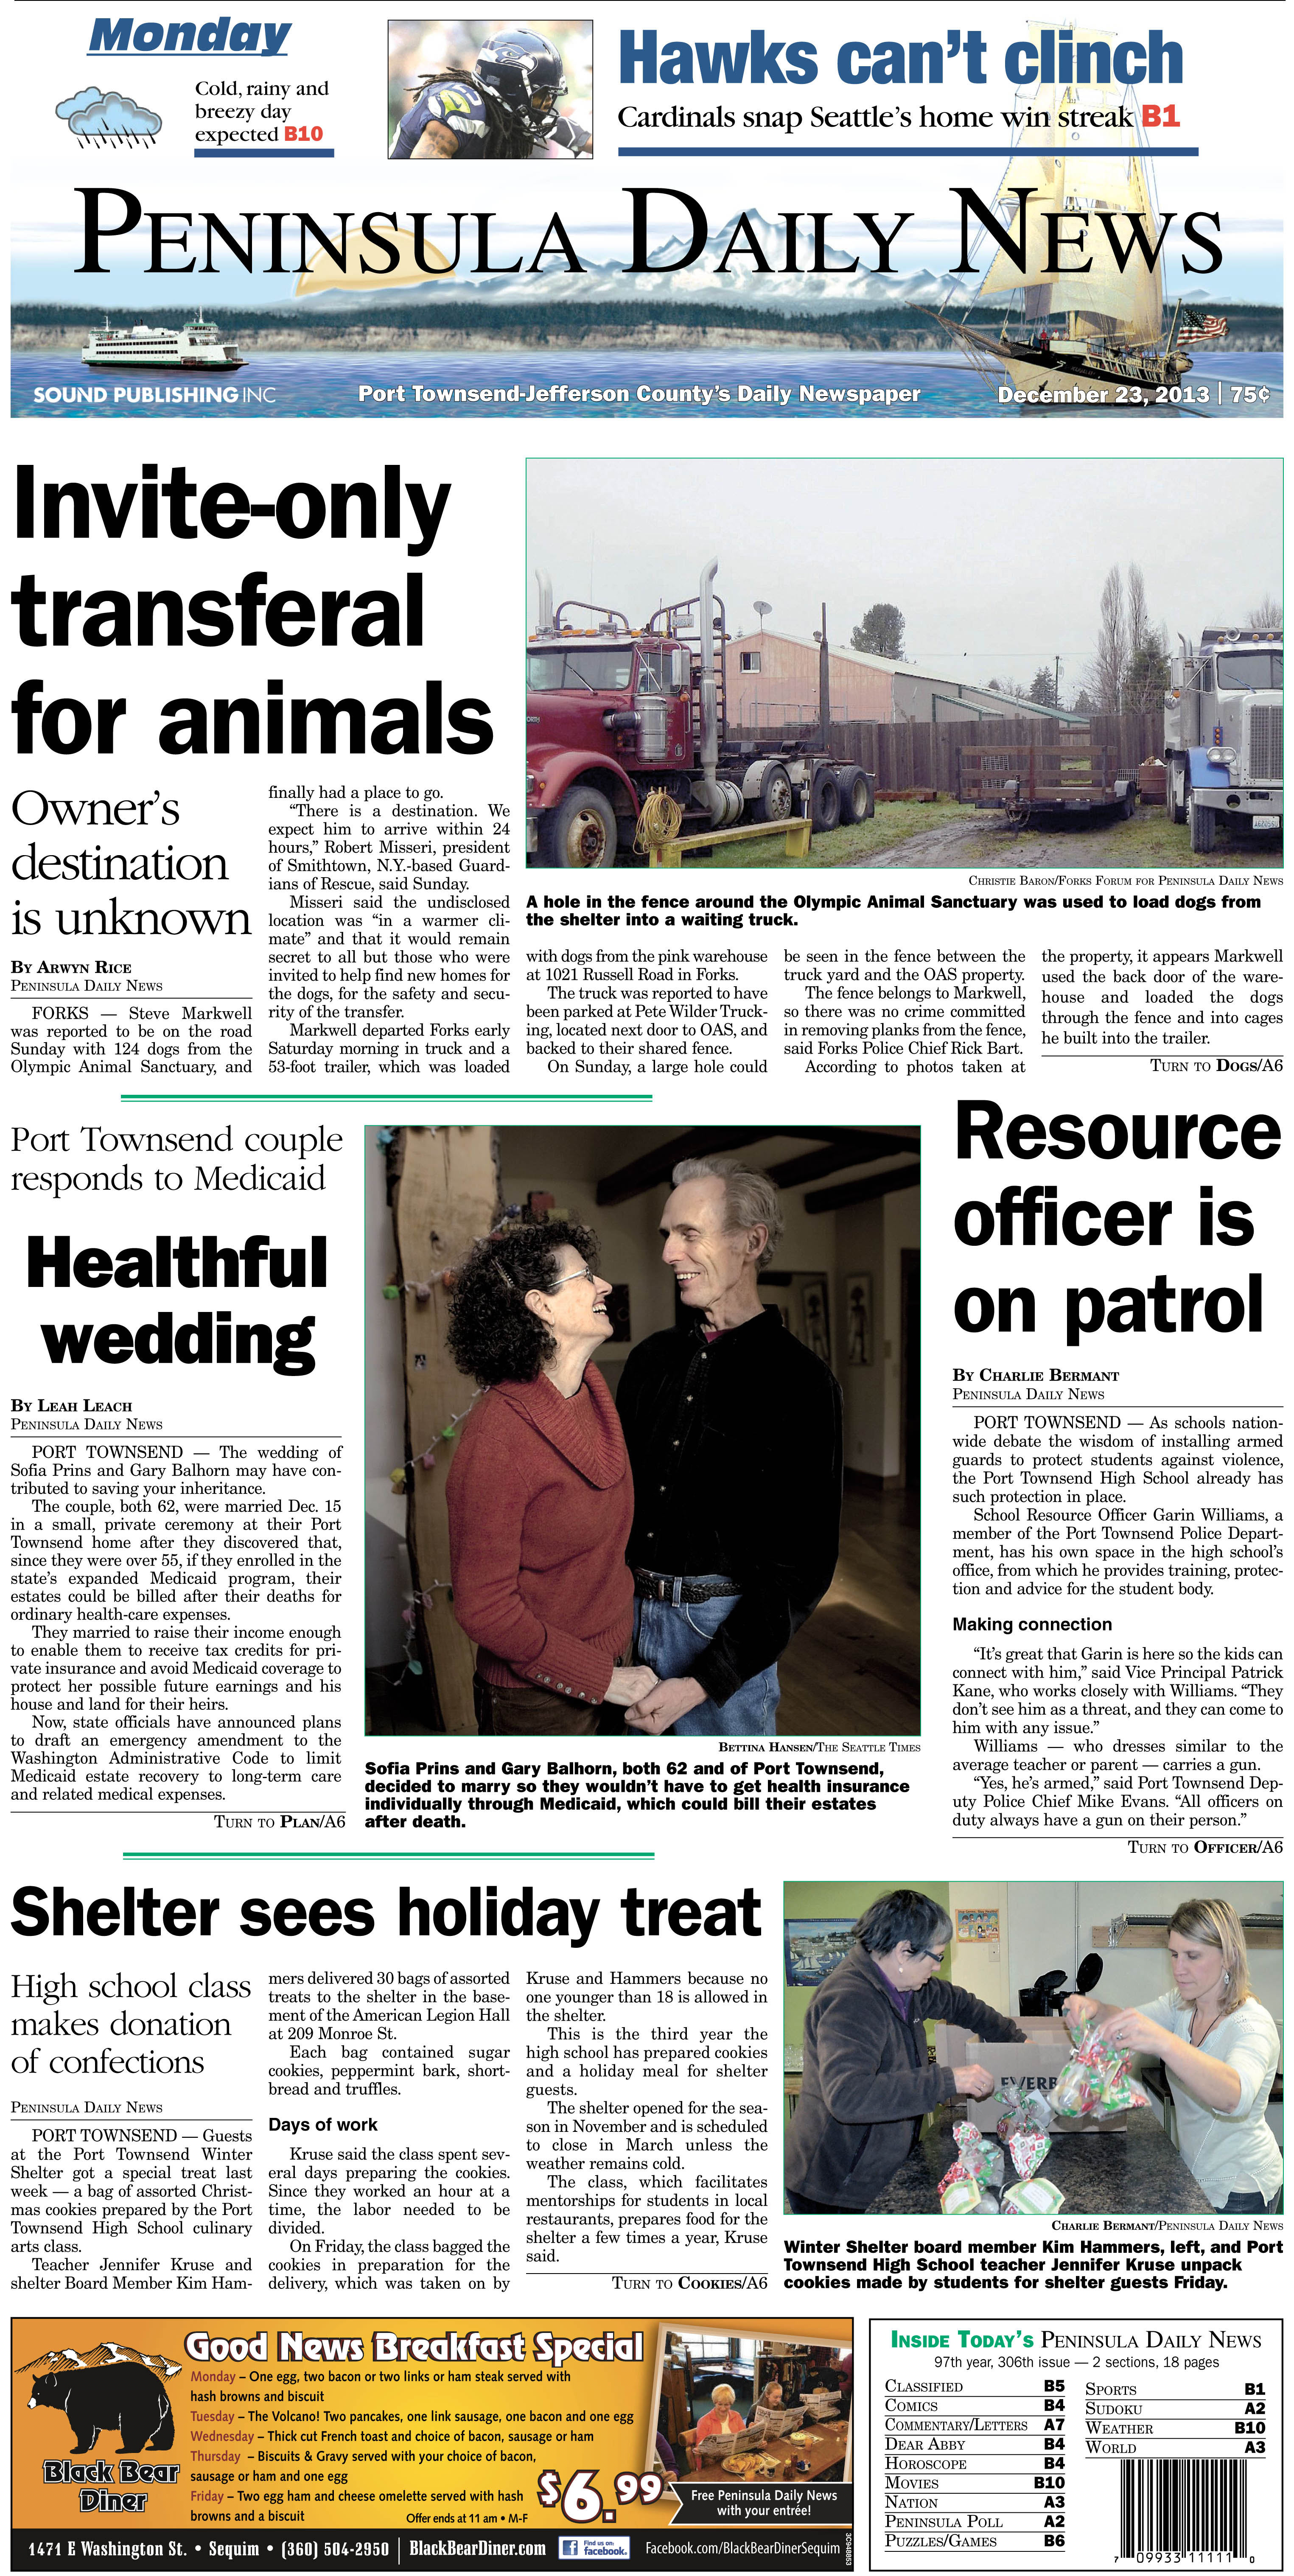 PDN's front page for today's Port Townsend/Jefferson County edition.